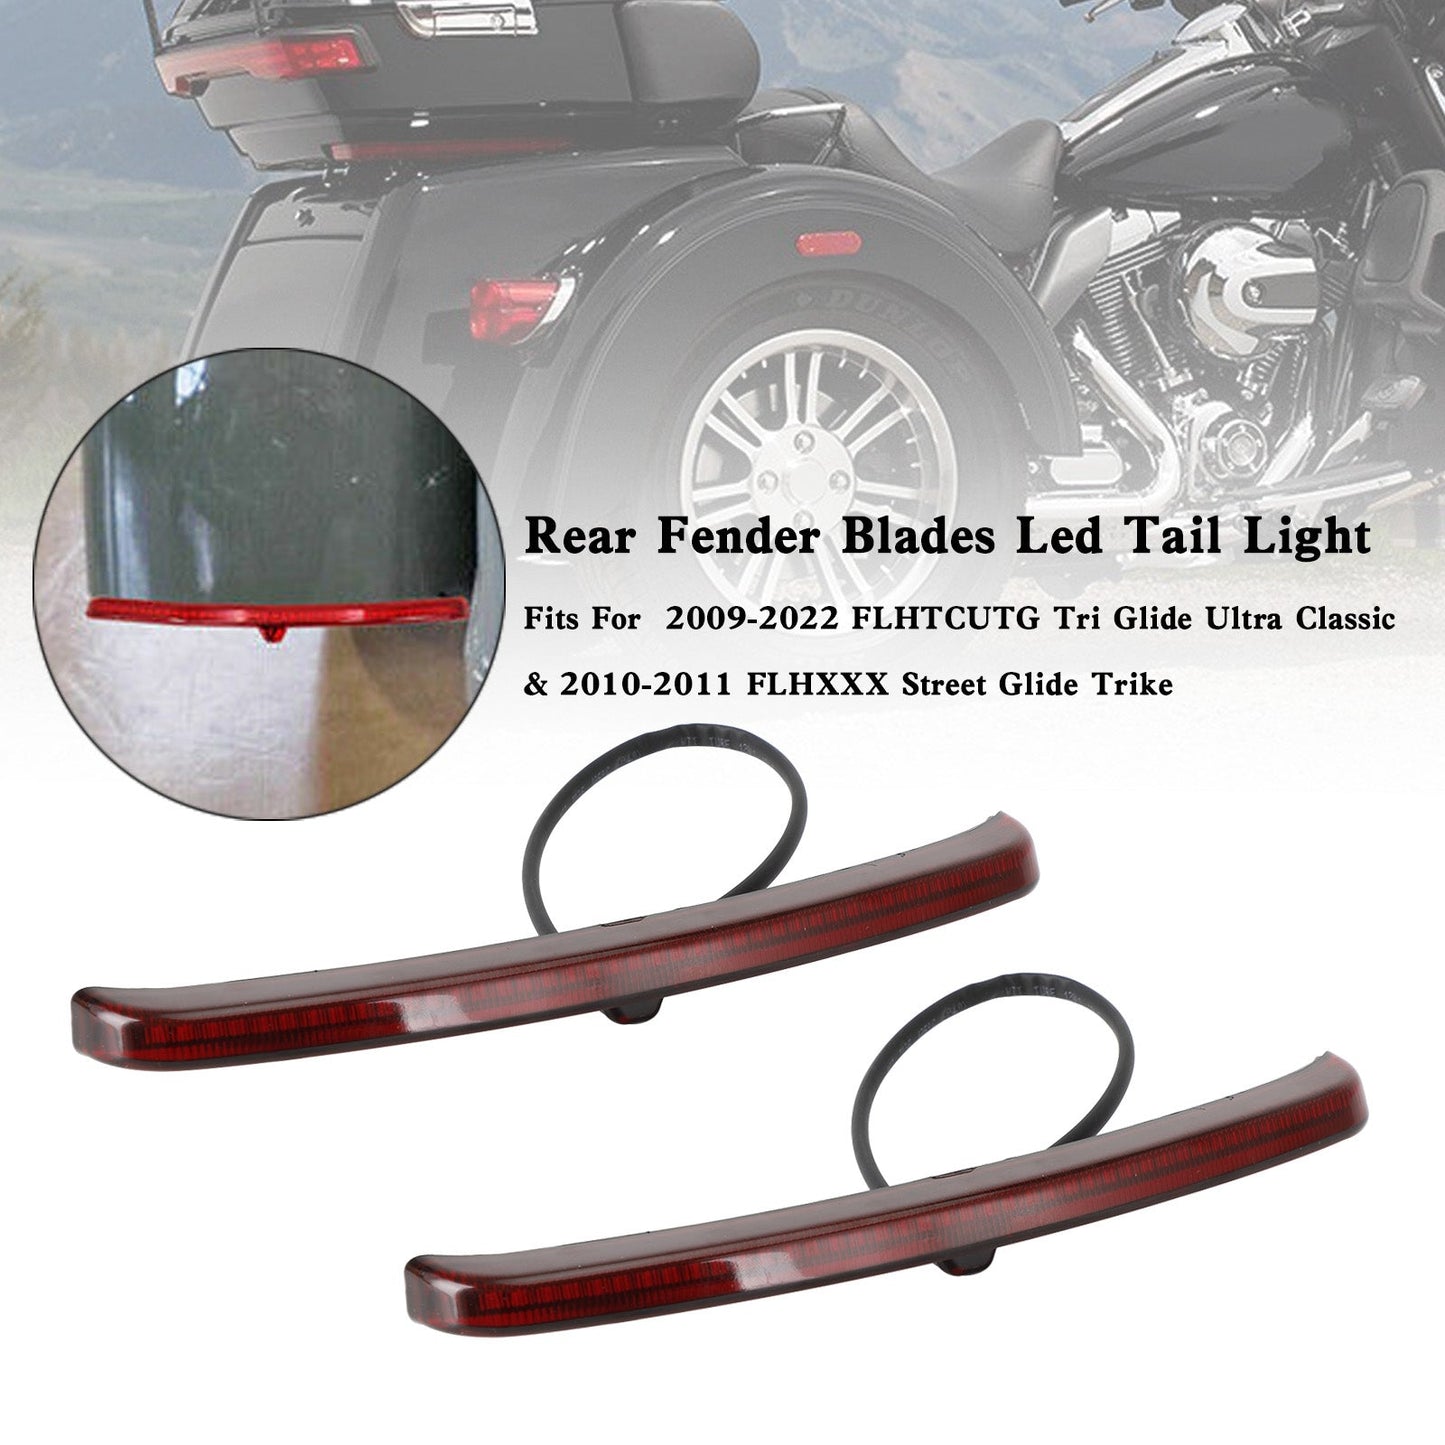 Rear Fender Blades Led Tail Light Fit For Touring Trike Glide 2009-2022